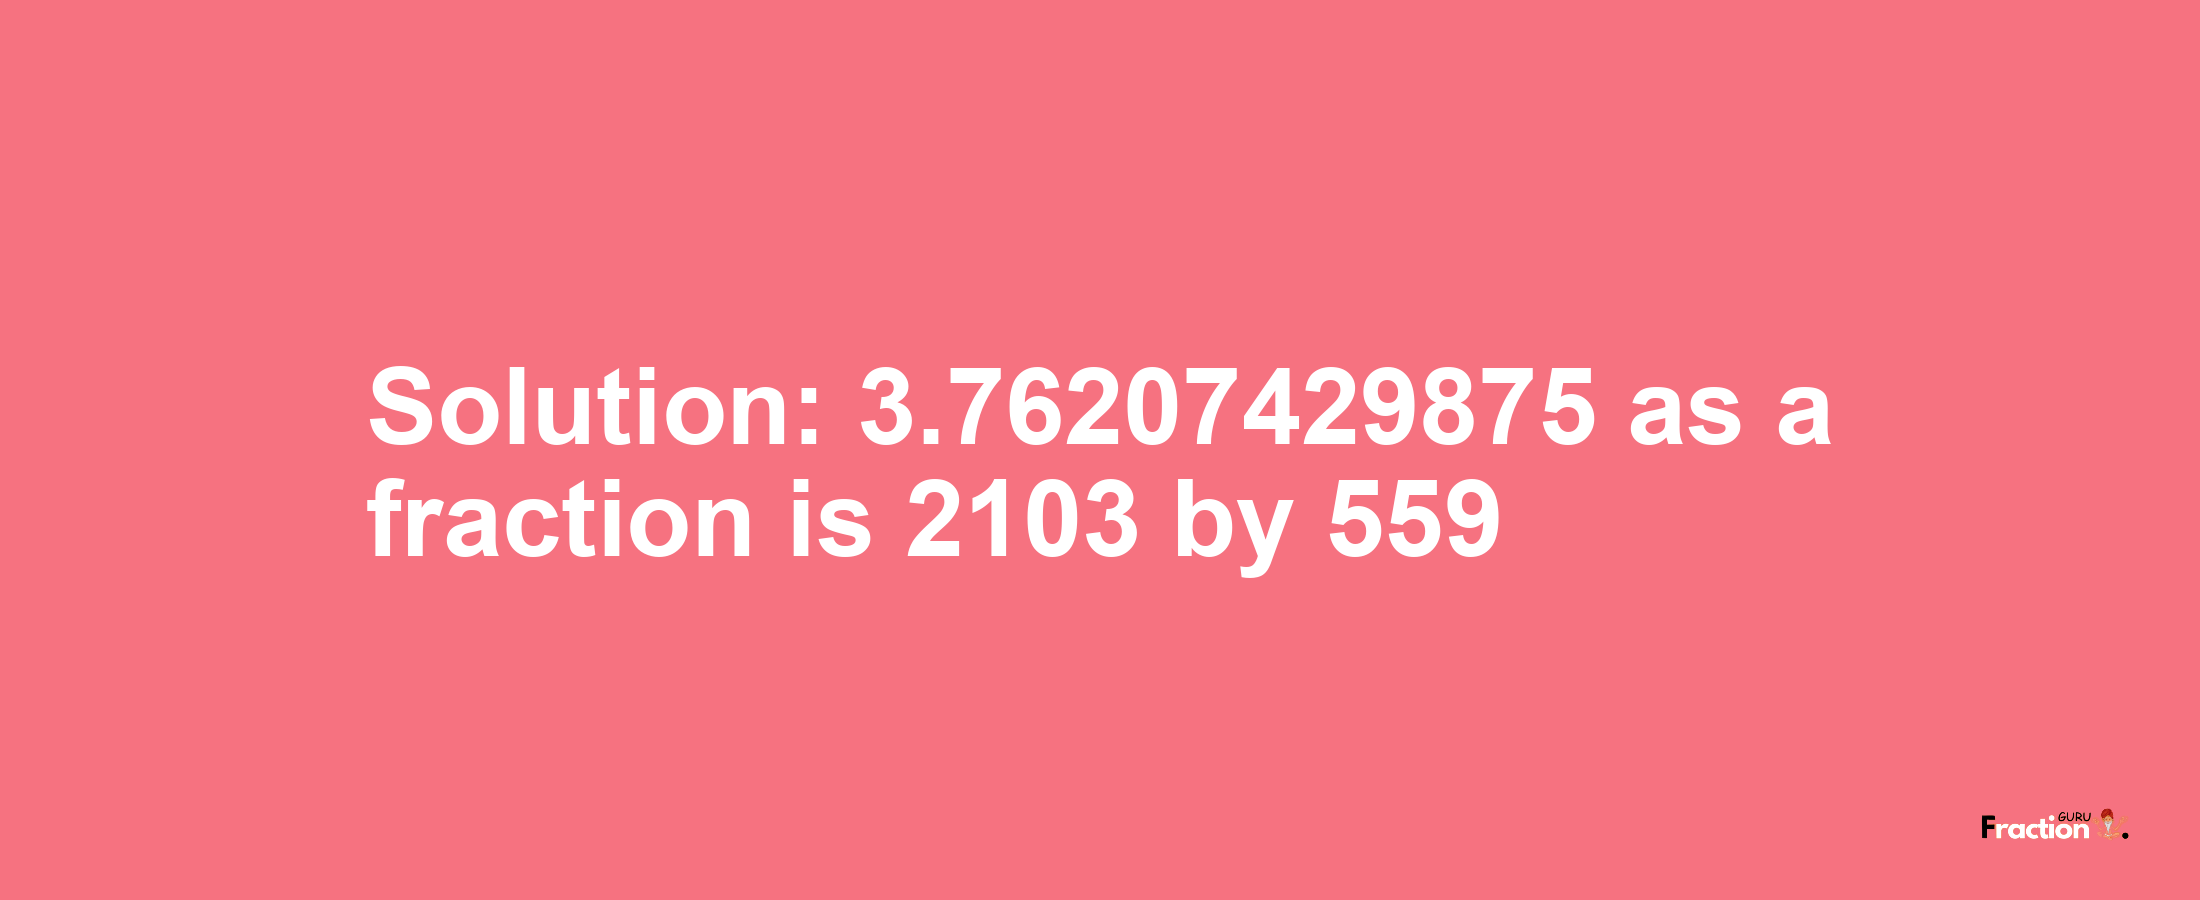 Solution:3.76207429875 as a fraction is 2103/559